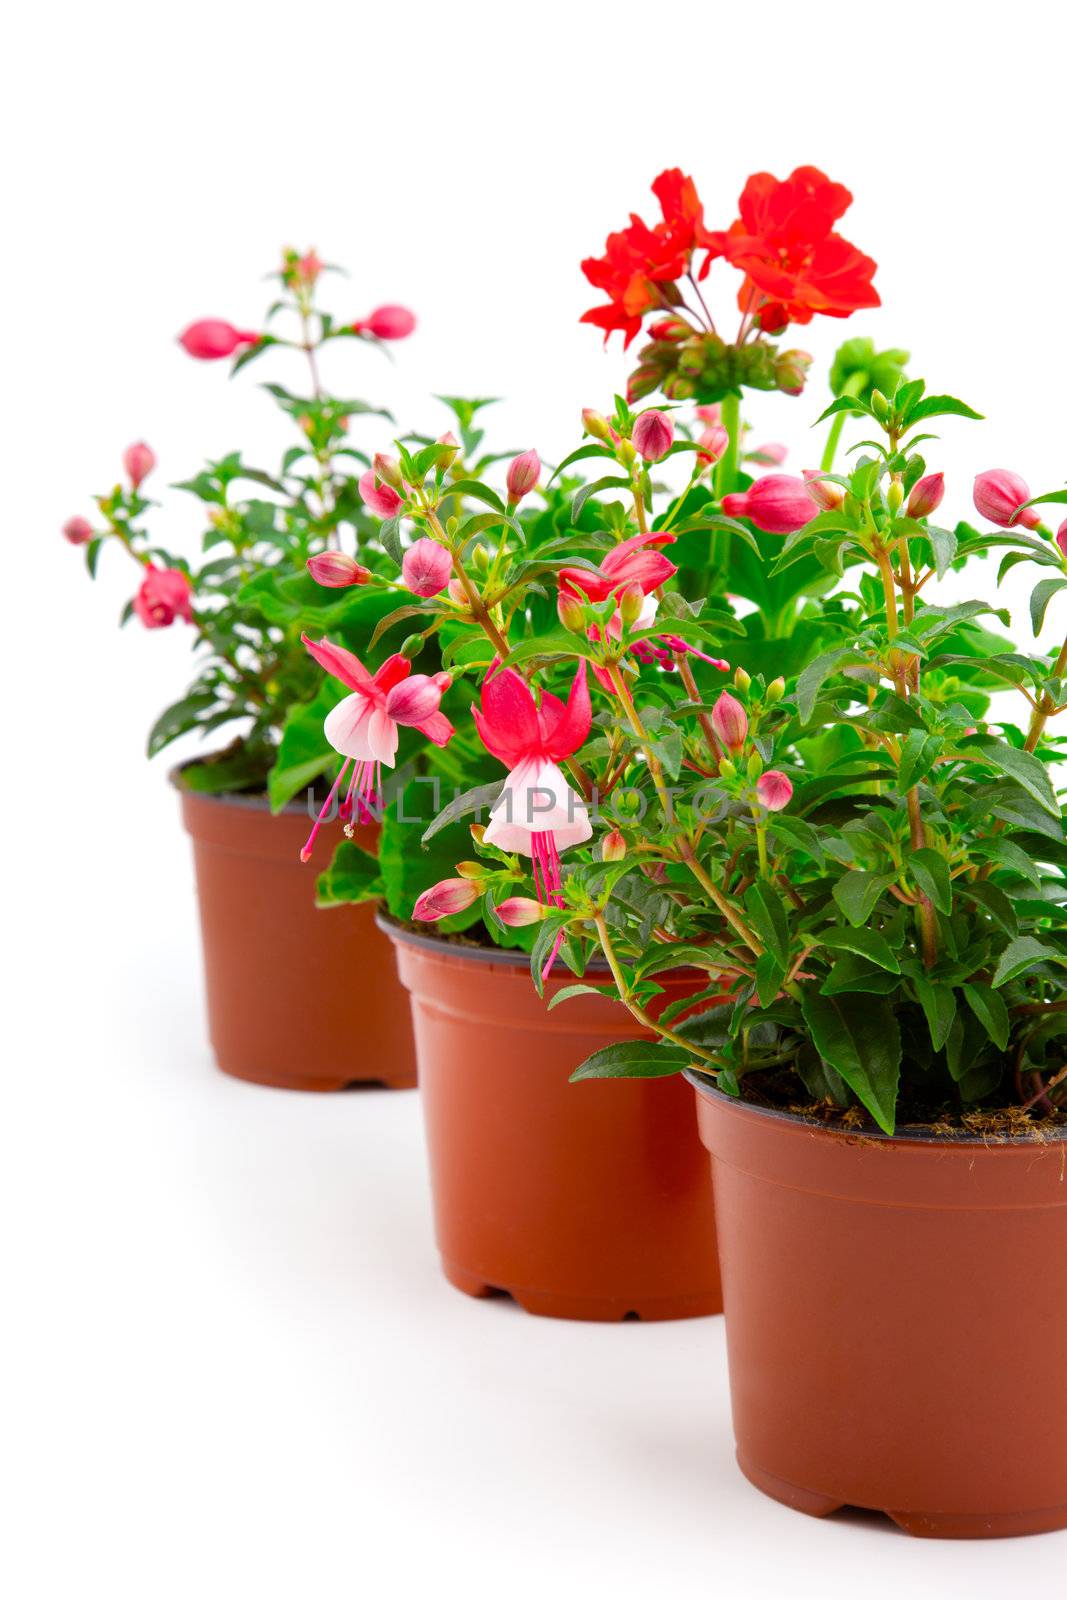 blooming fuchsia and geranium in the pot, isolated on a white background